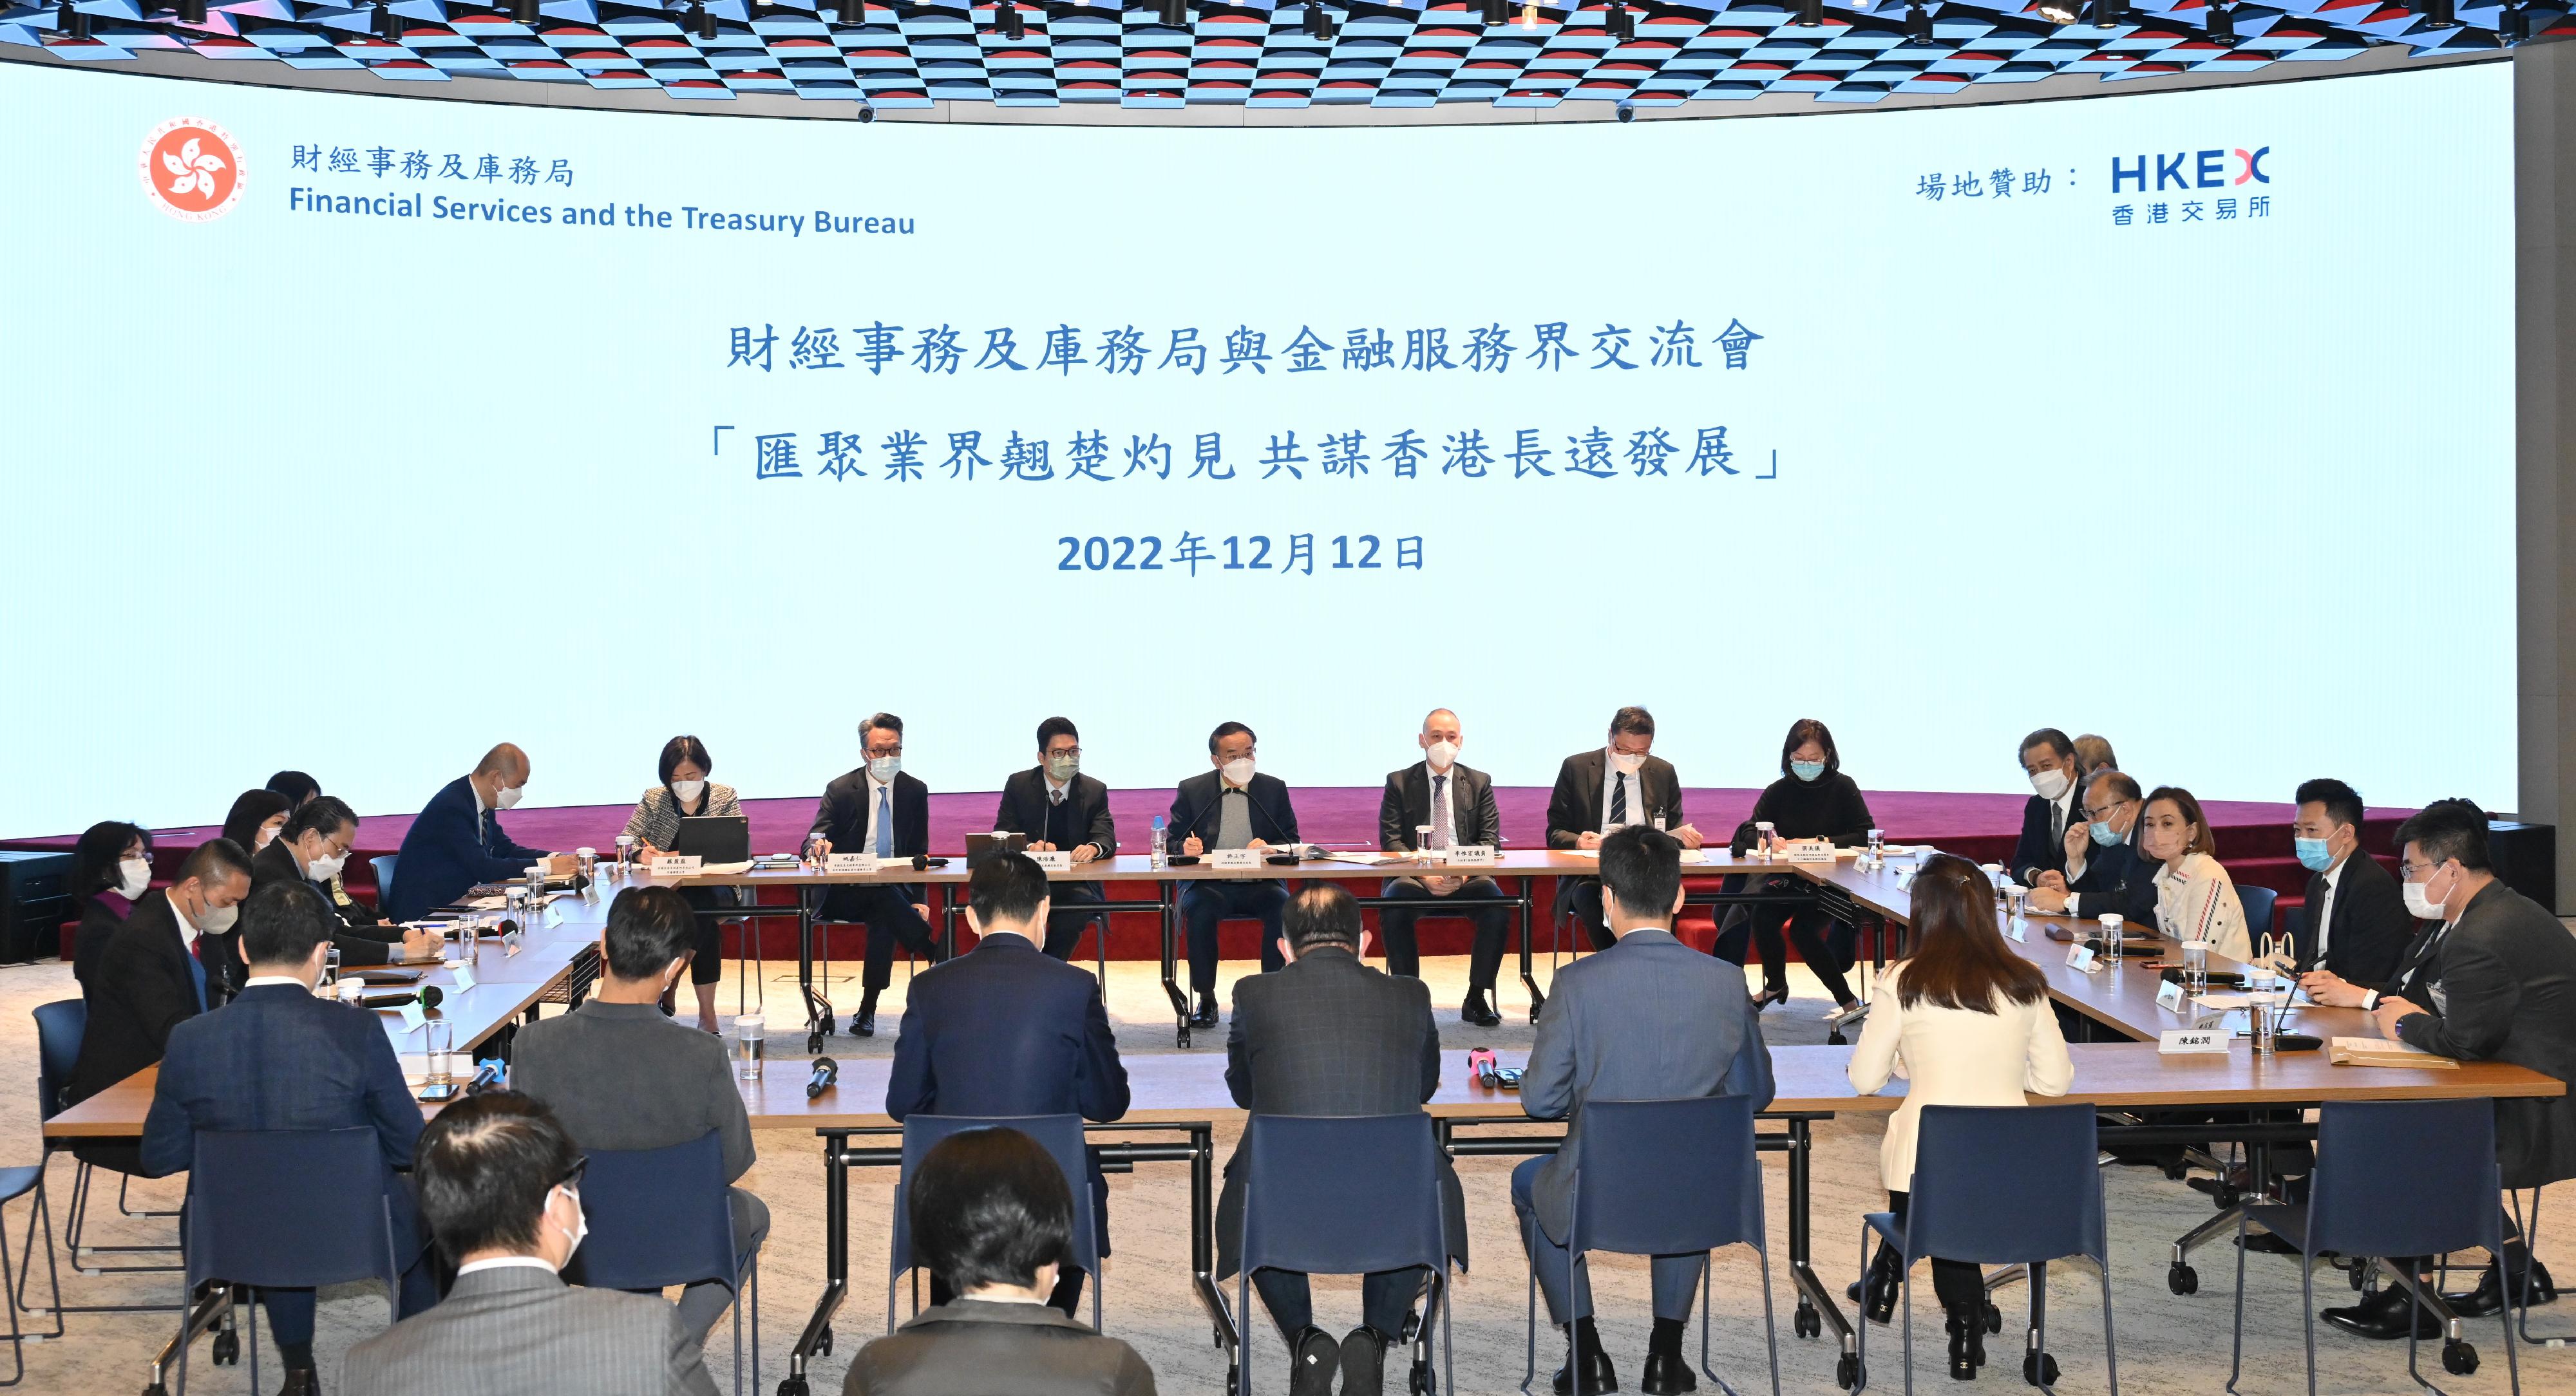 The Financial Services and the Treasury Bureau today (December 12) organised an exchange session with the financial services sector to gather industry leaders to discuss the long-term development of Hong Kong.